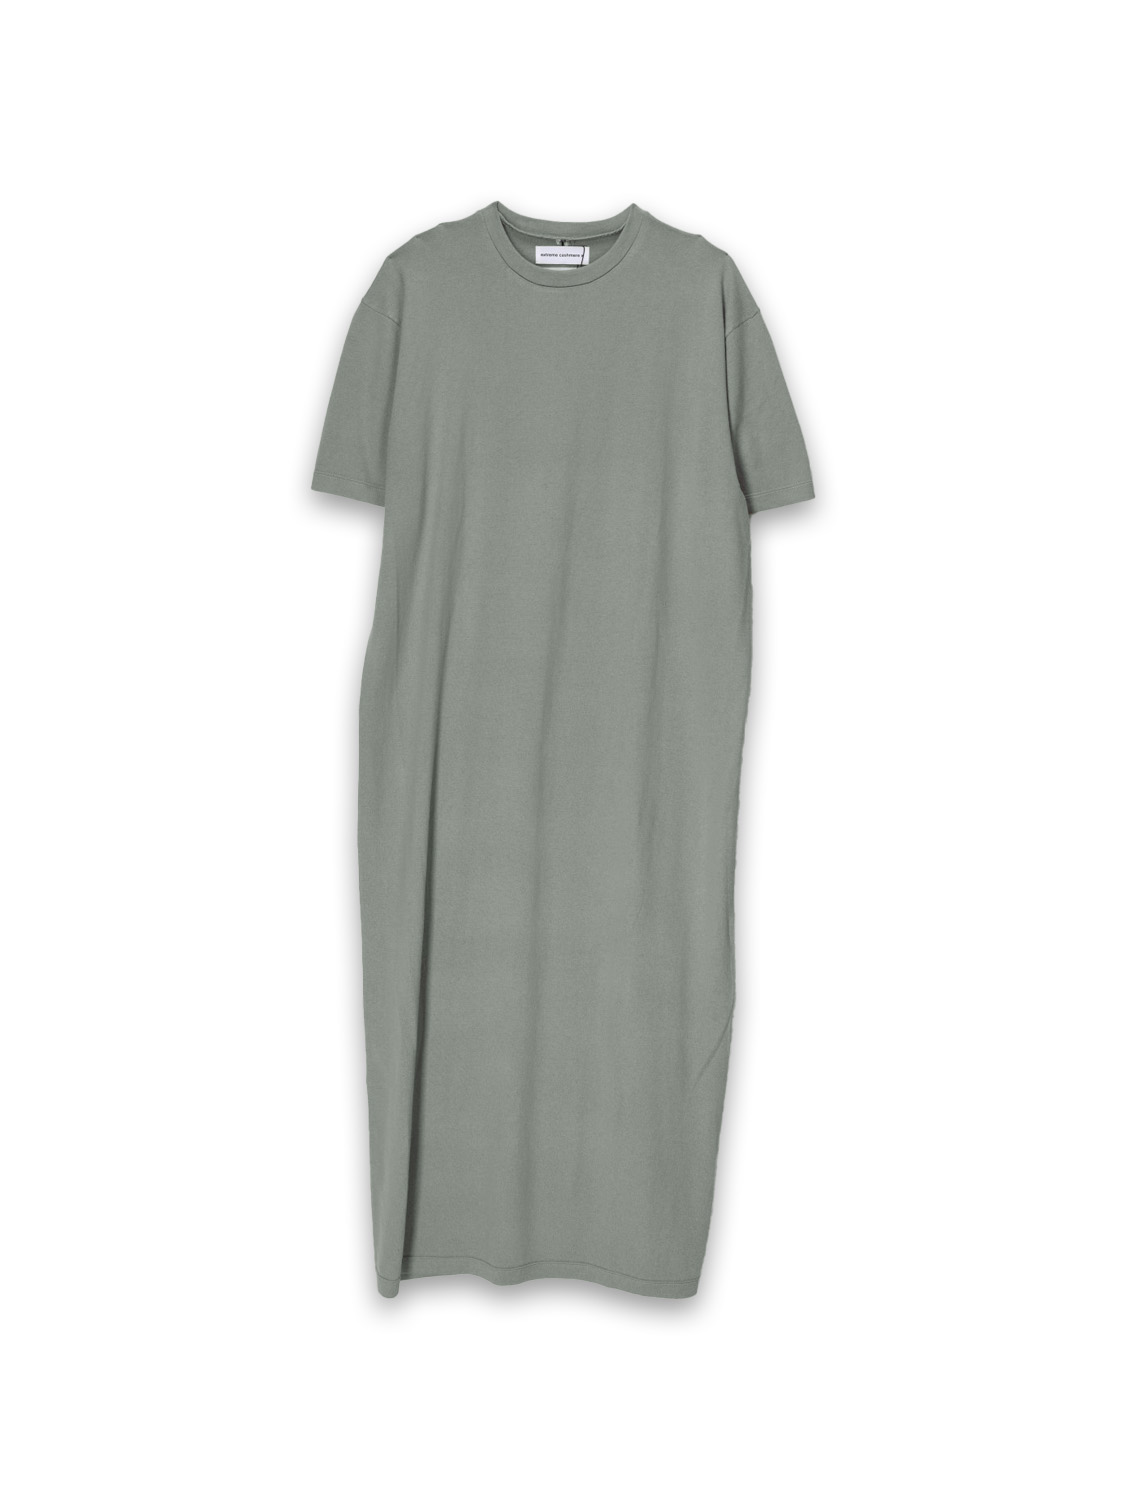 Extreme Cashmere Kris – Oversized T-shirt dress made from a cashmere and cotton blend  hellgrün One Size